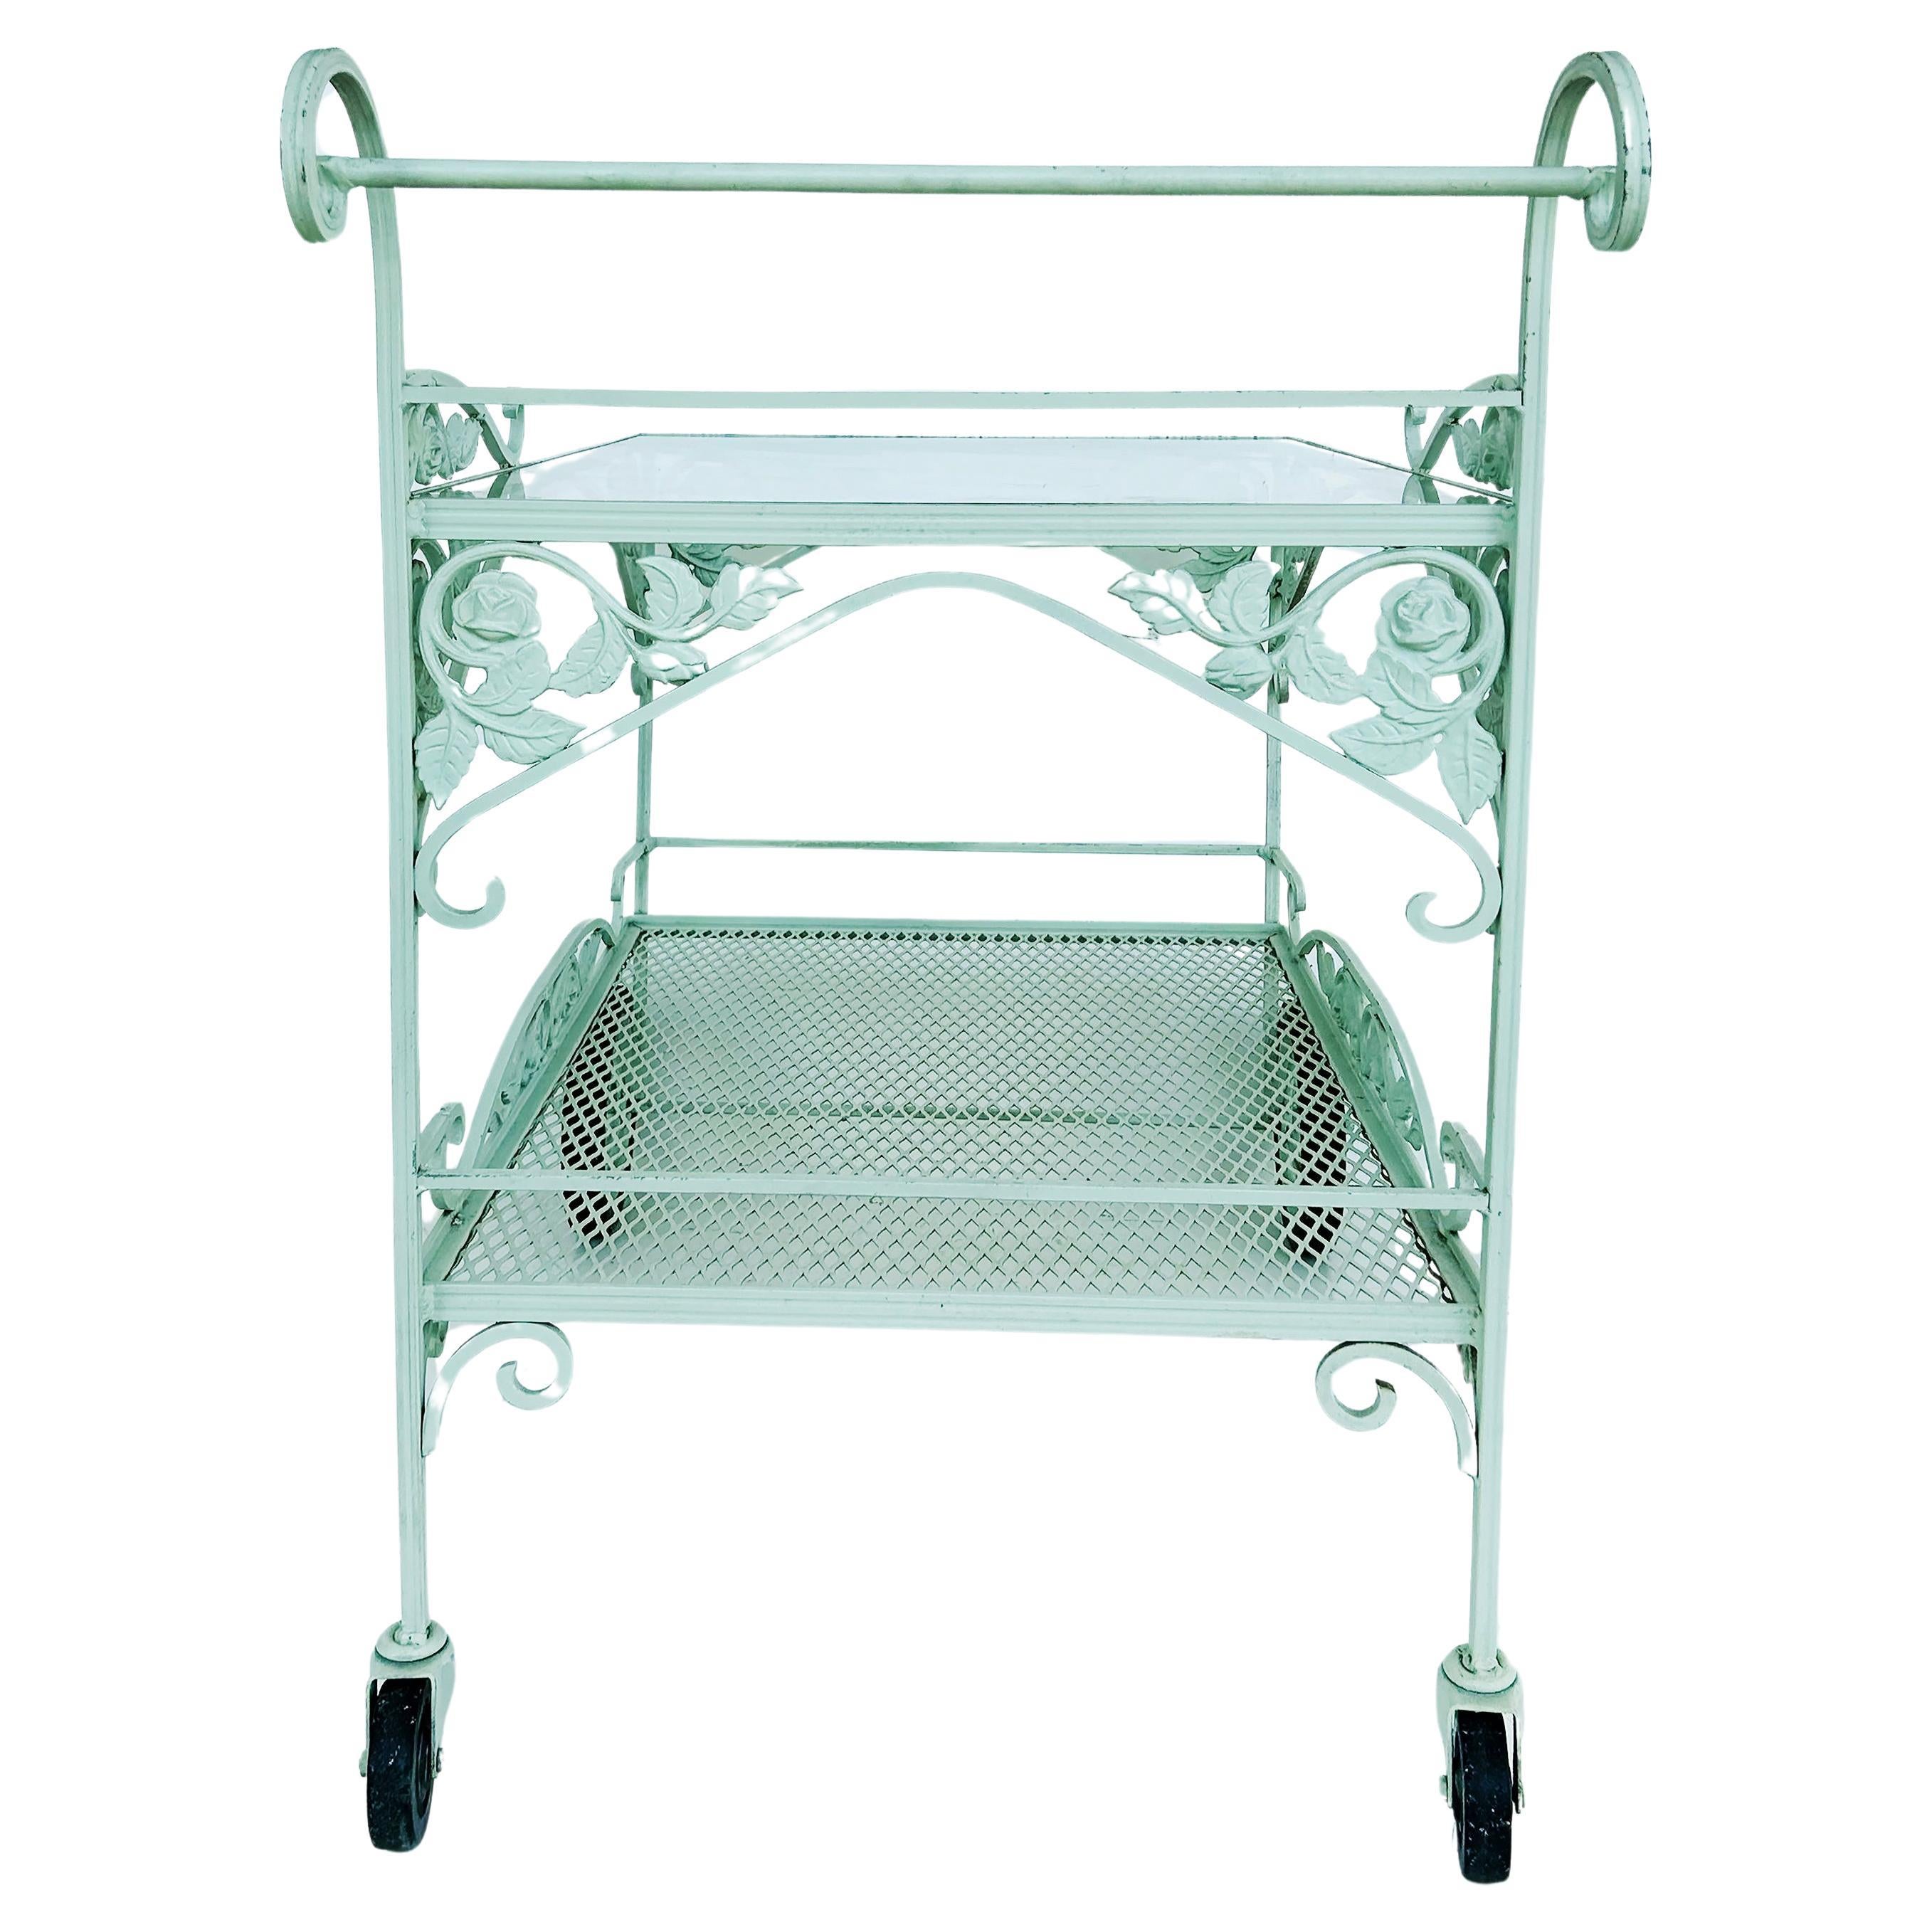 Painted Russell Woodard Wrought Iron Patio/Serving/Bar/Tea Cart With Floral Decoration For Sale